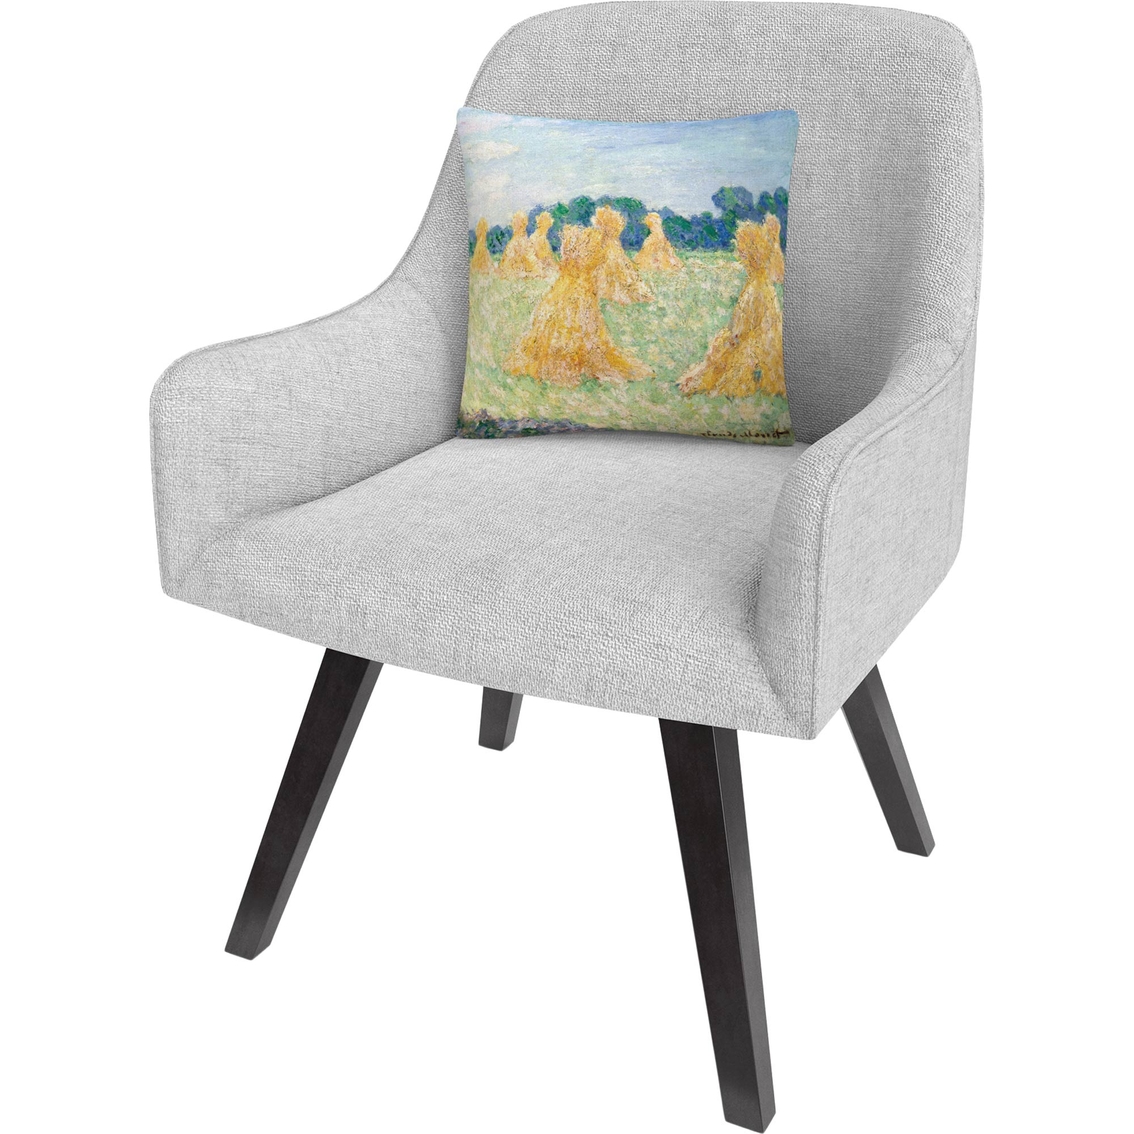 Trademark Fine Art Claude Monet The Young Ladies Of Giverny Decorative Throw Pillow - Image 2 of 3